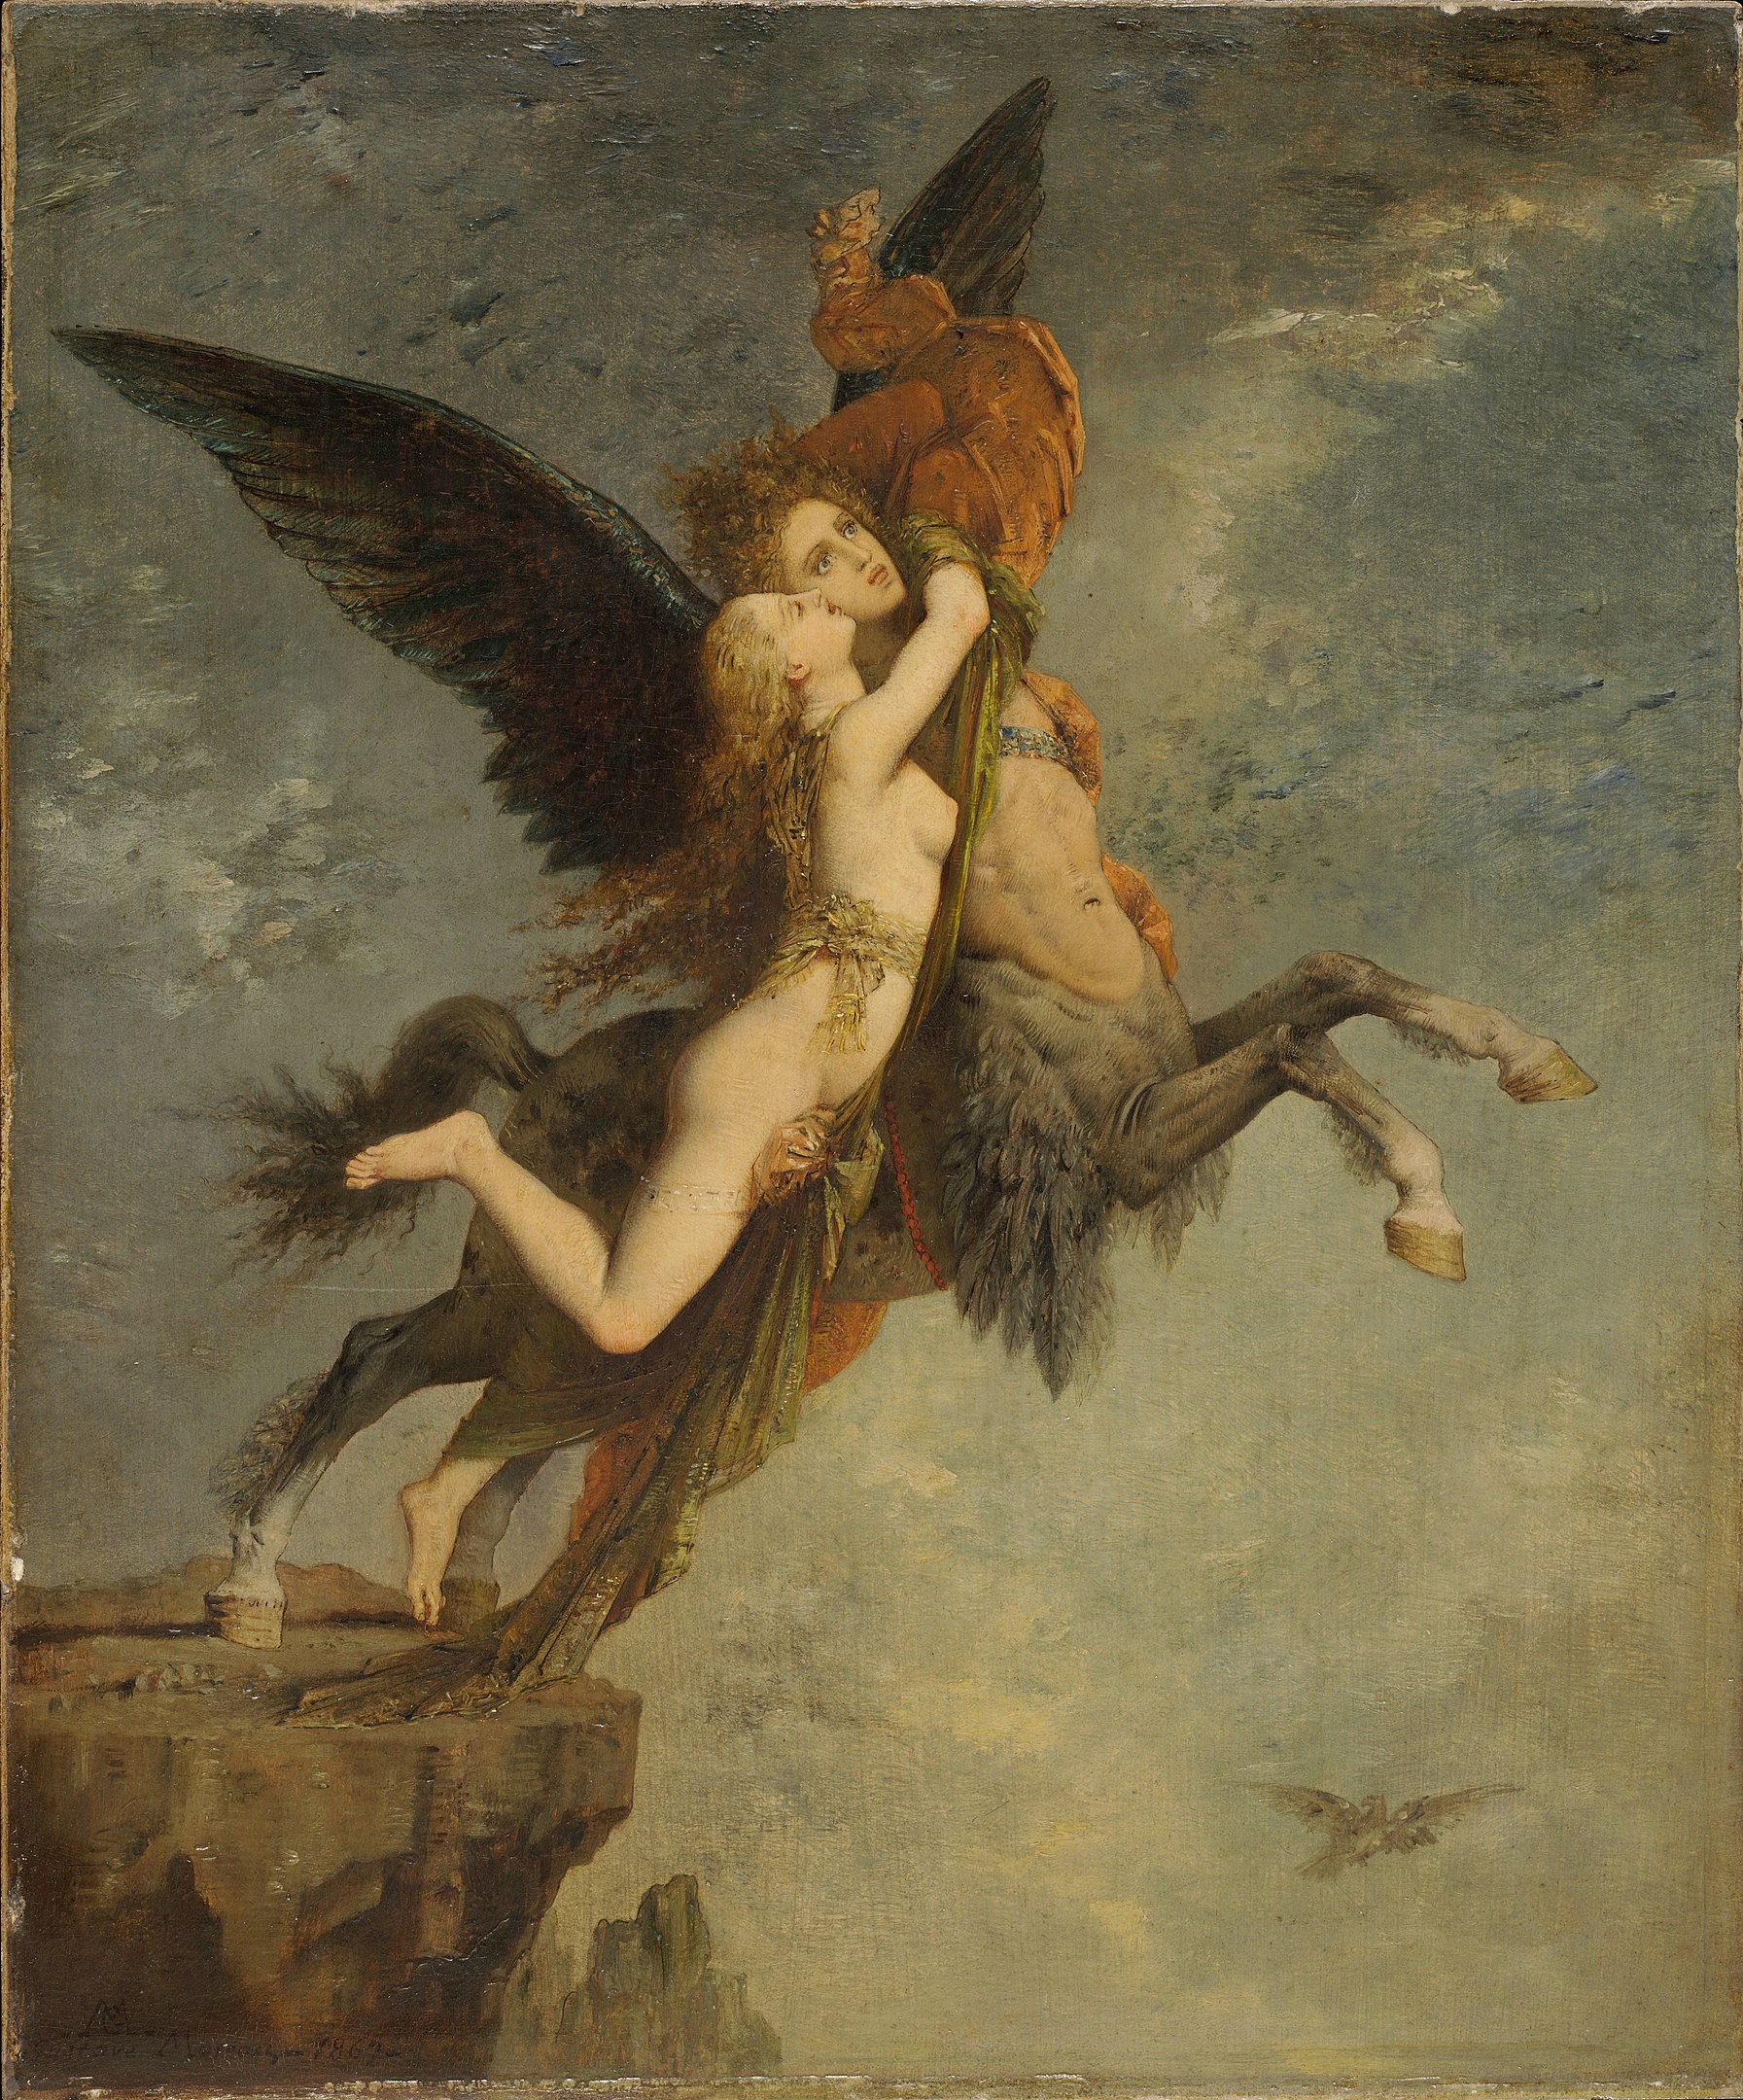 A woman holds on to a winged mythical creature who is half man, half horse as the creature begins to fly from the edge of a cliff.